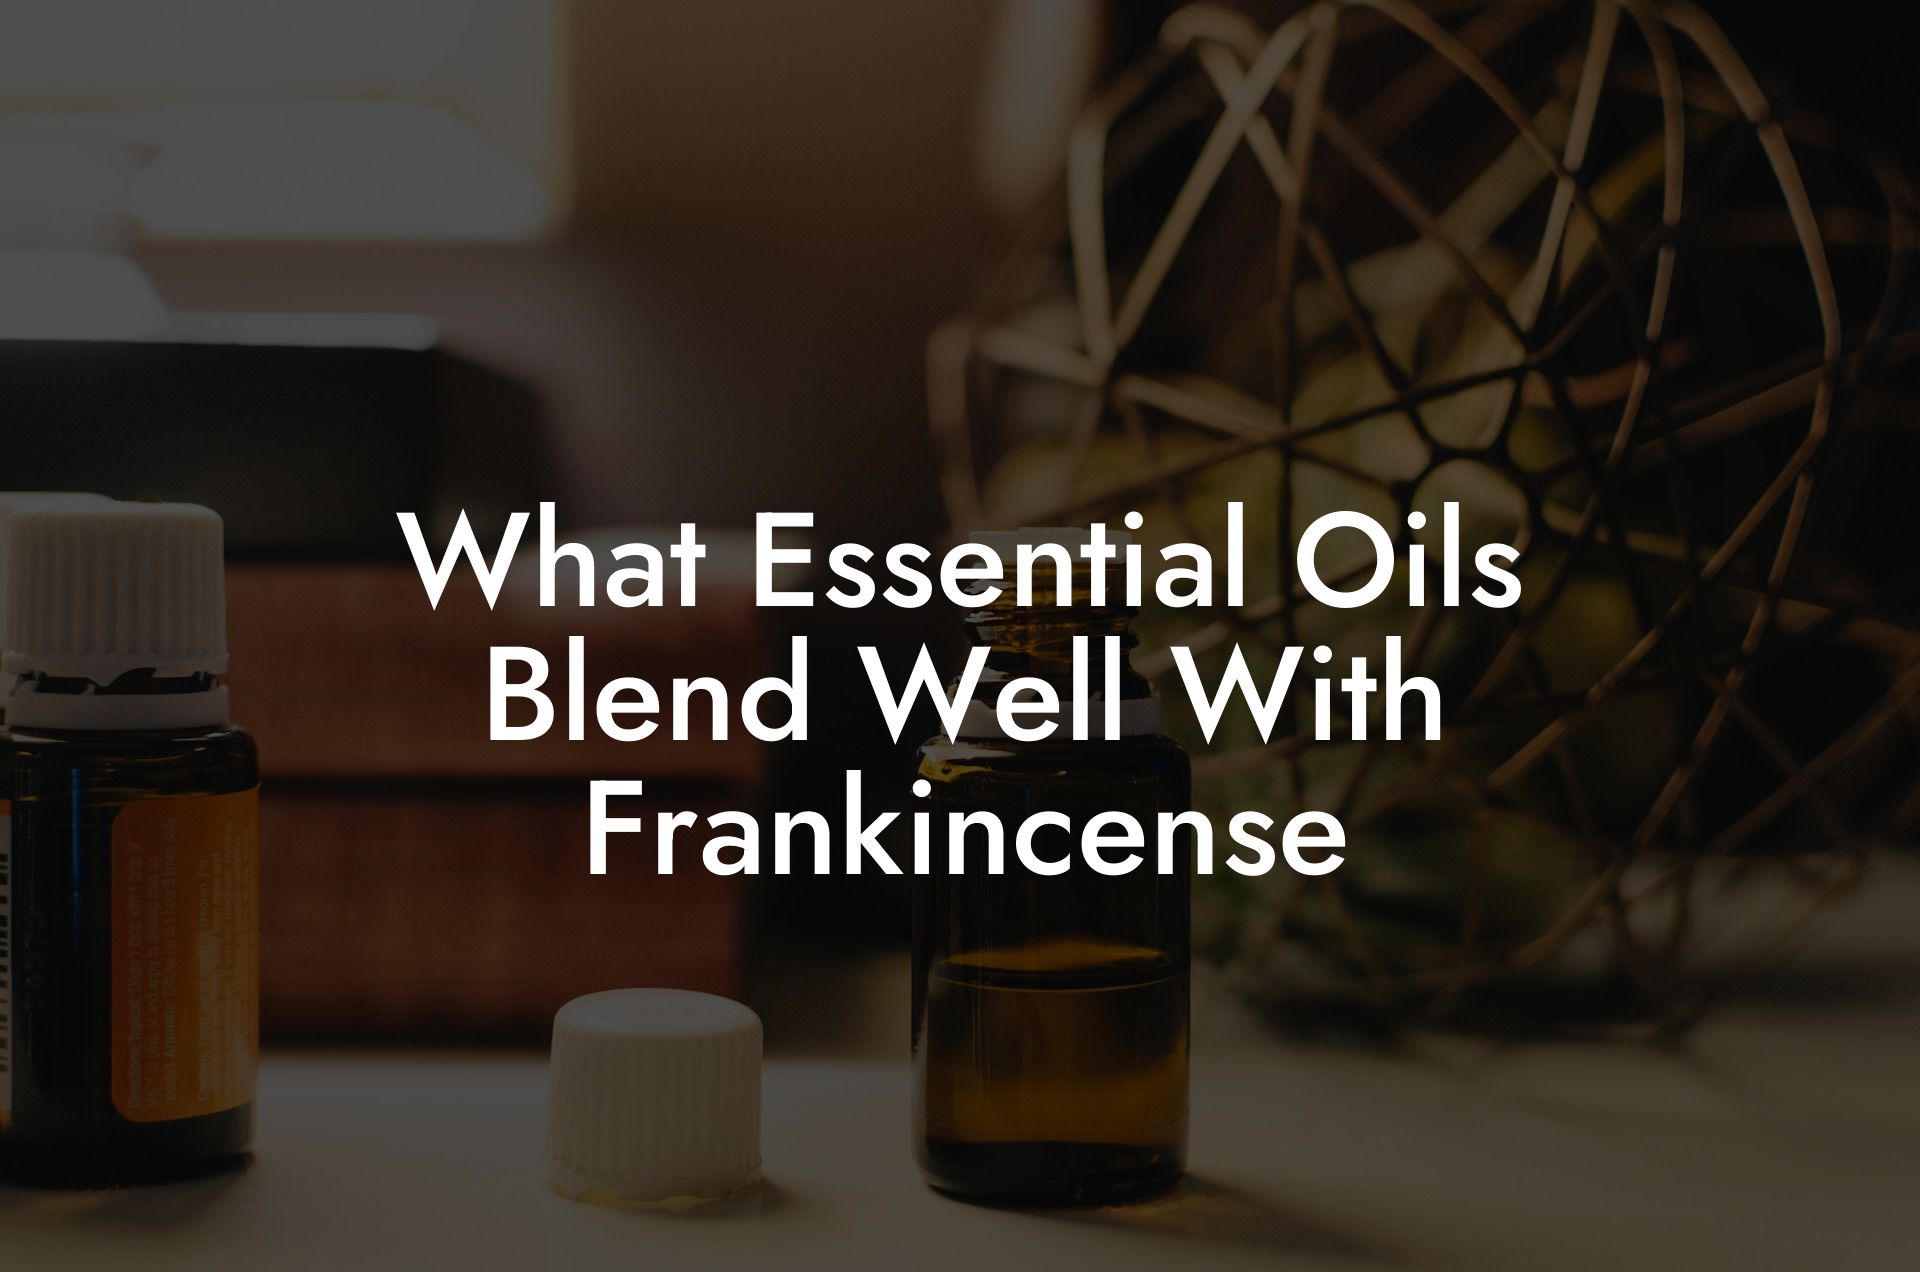 What Essential Oils Blend Well With Frankincense